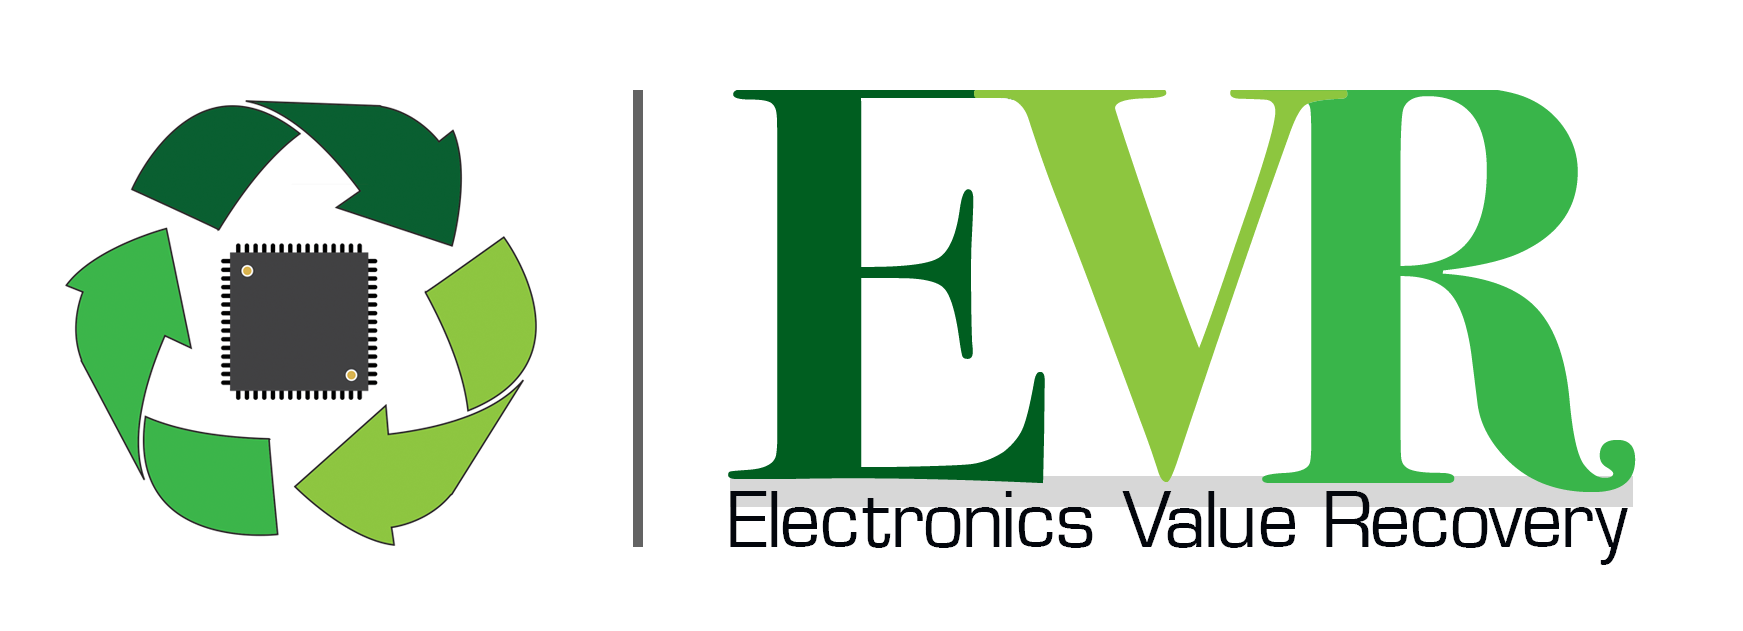 Electronics Value Recovery